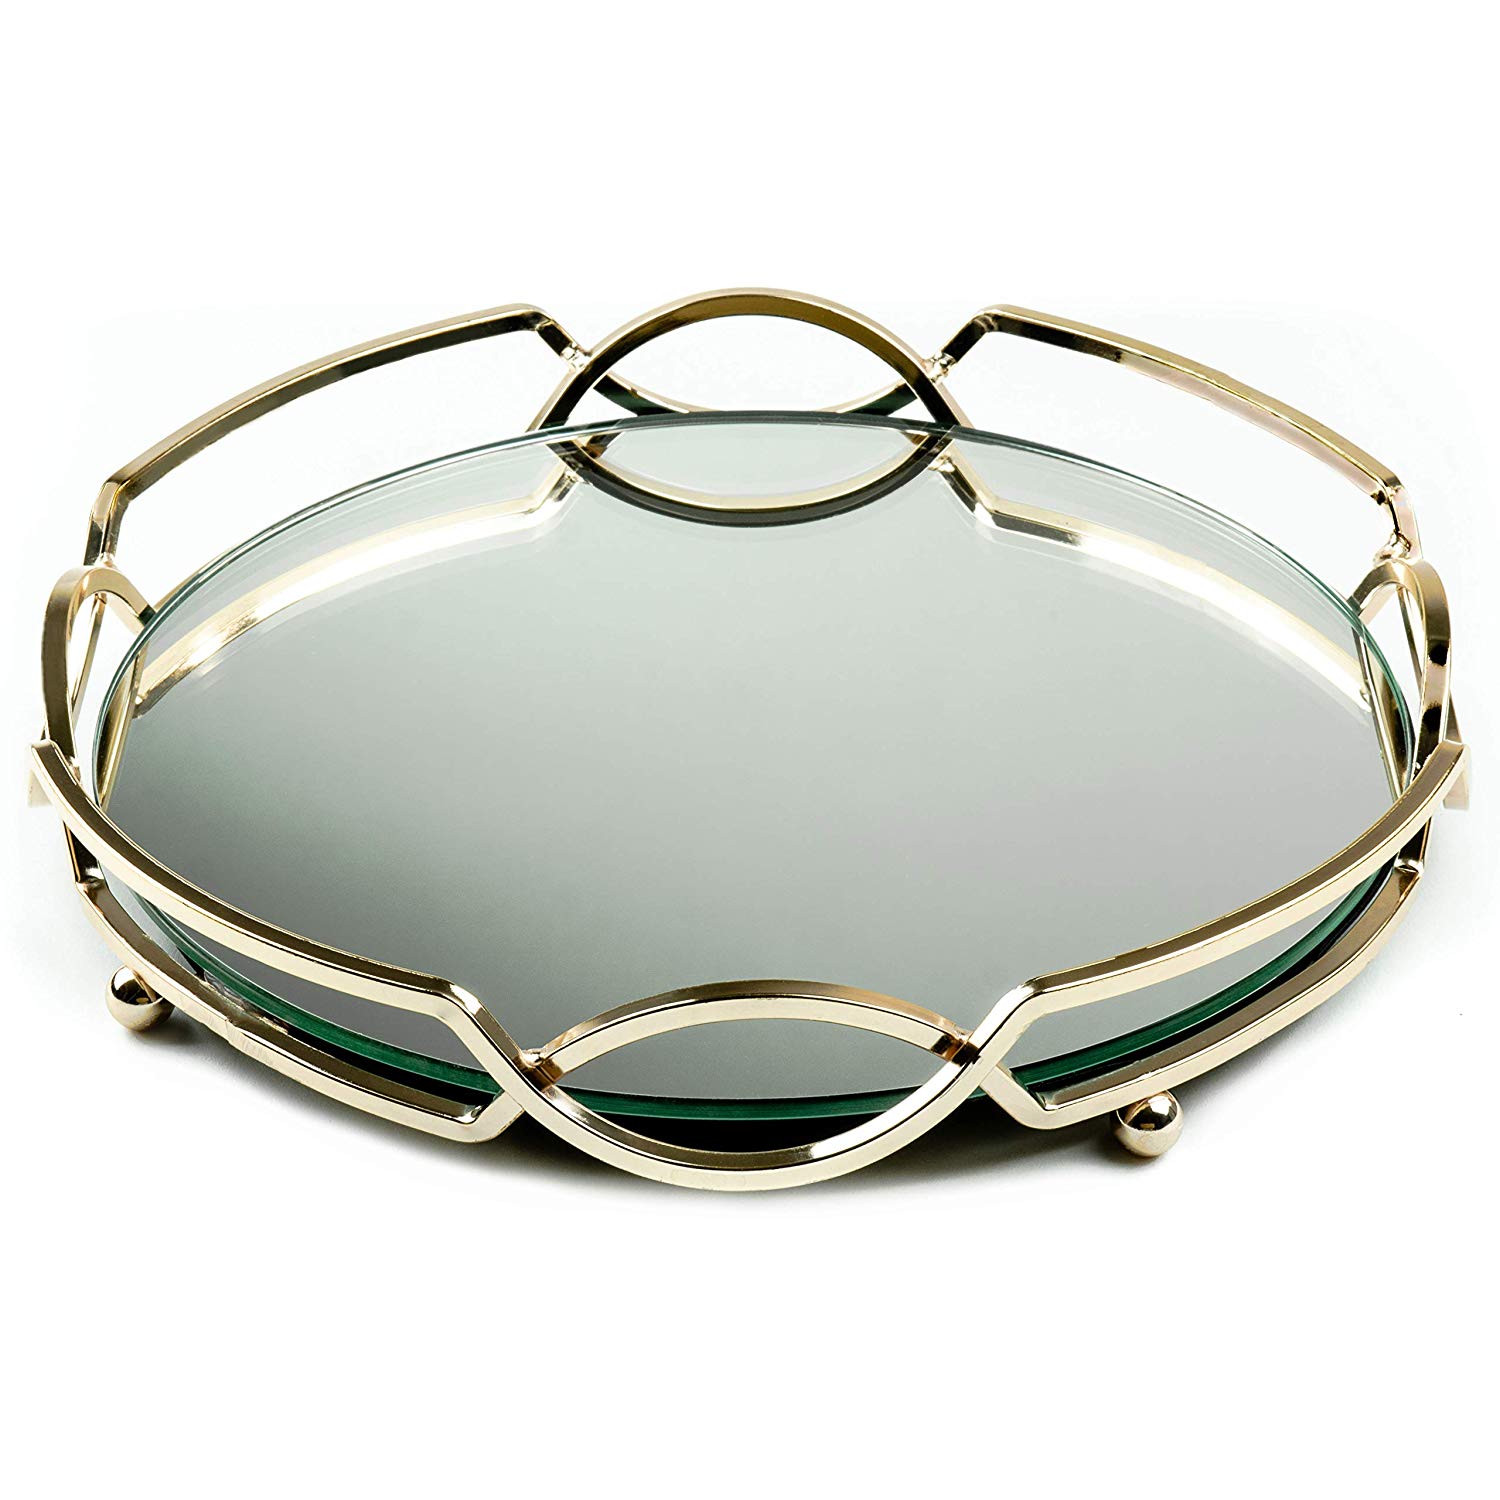 Uxury Round Gold Mirrored Metal Serving Tray